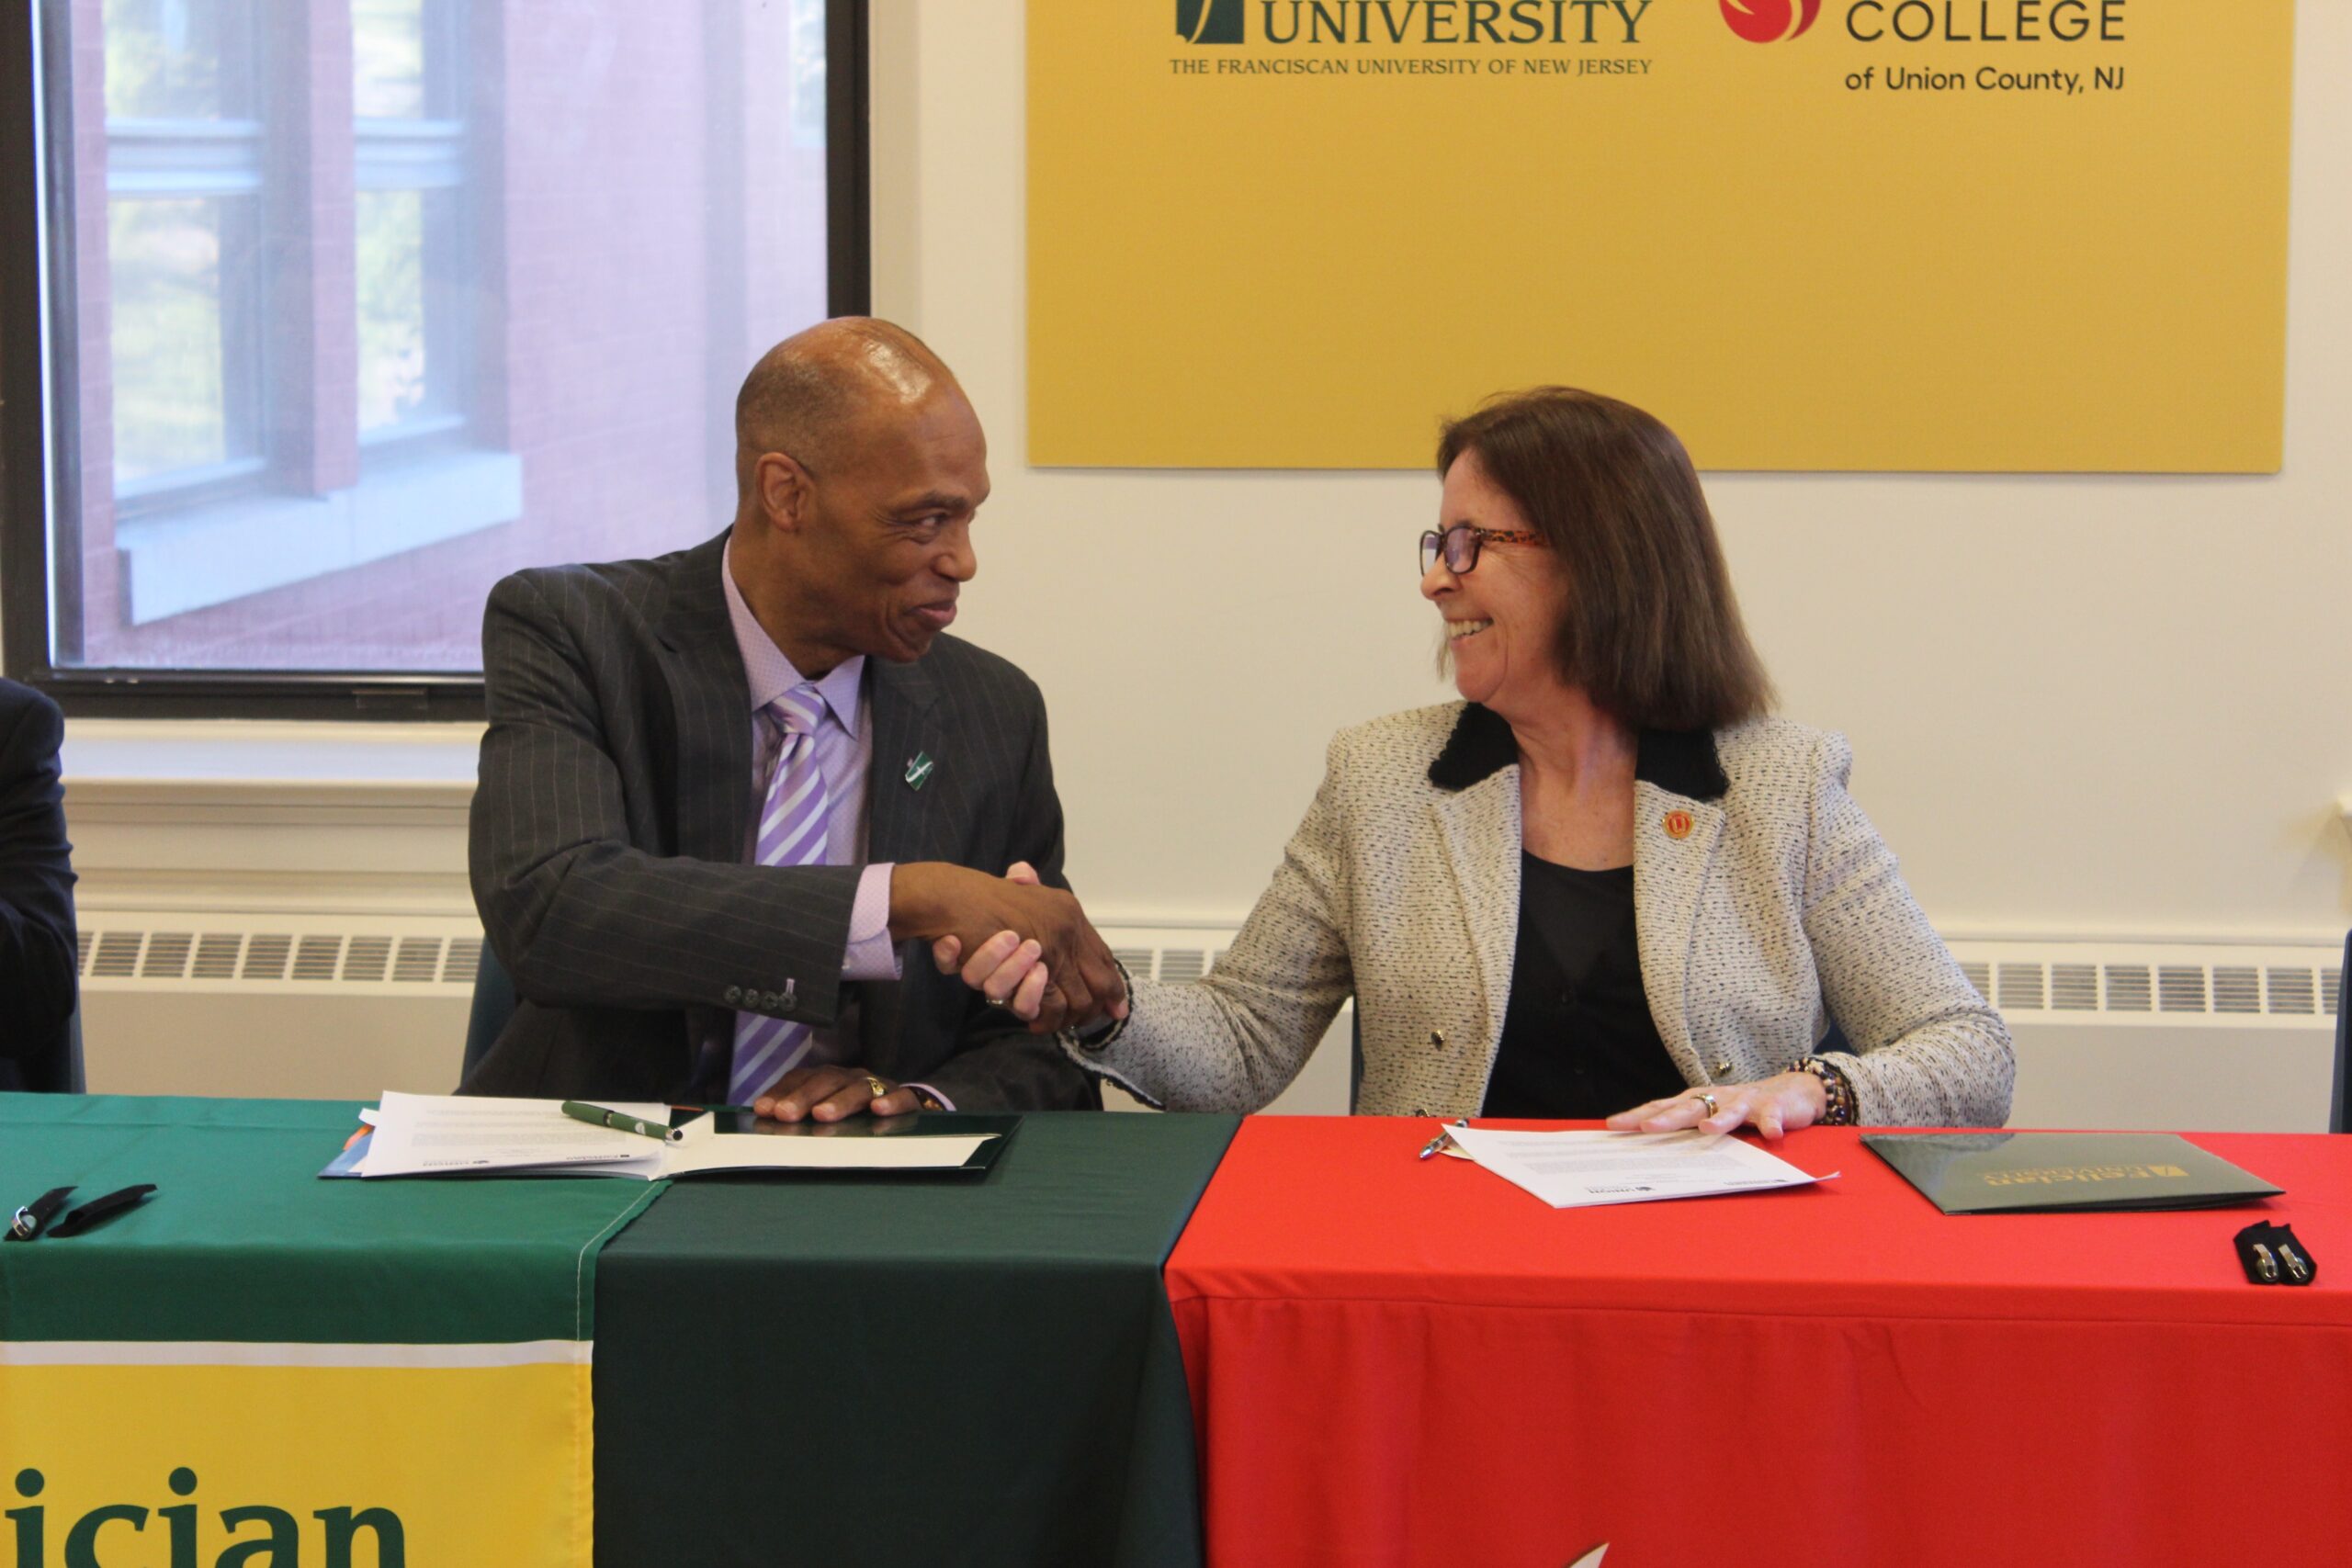 Presidents James W. Crawford, III, Felician University (left) and Dr. Margaret McMenamin, Union College (right)